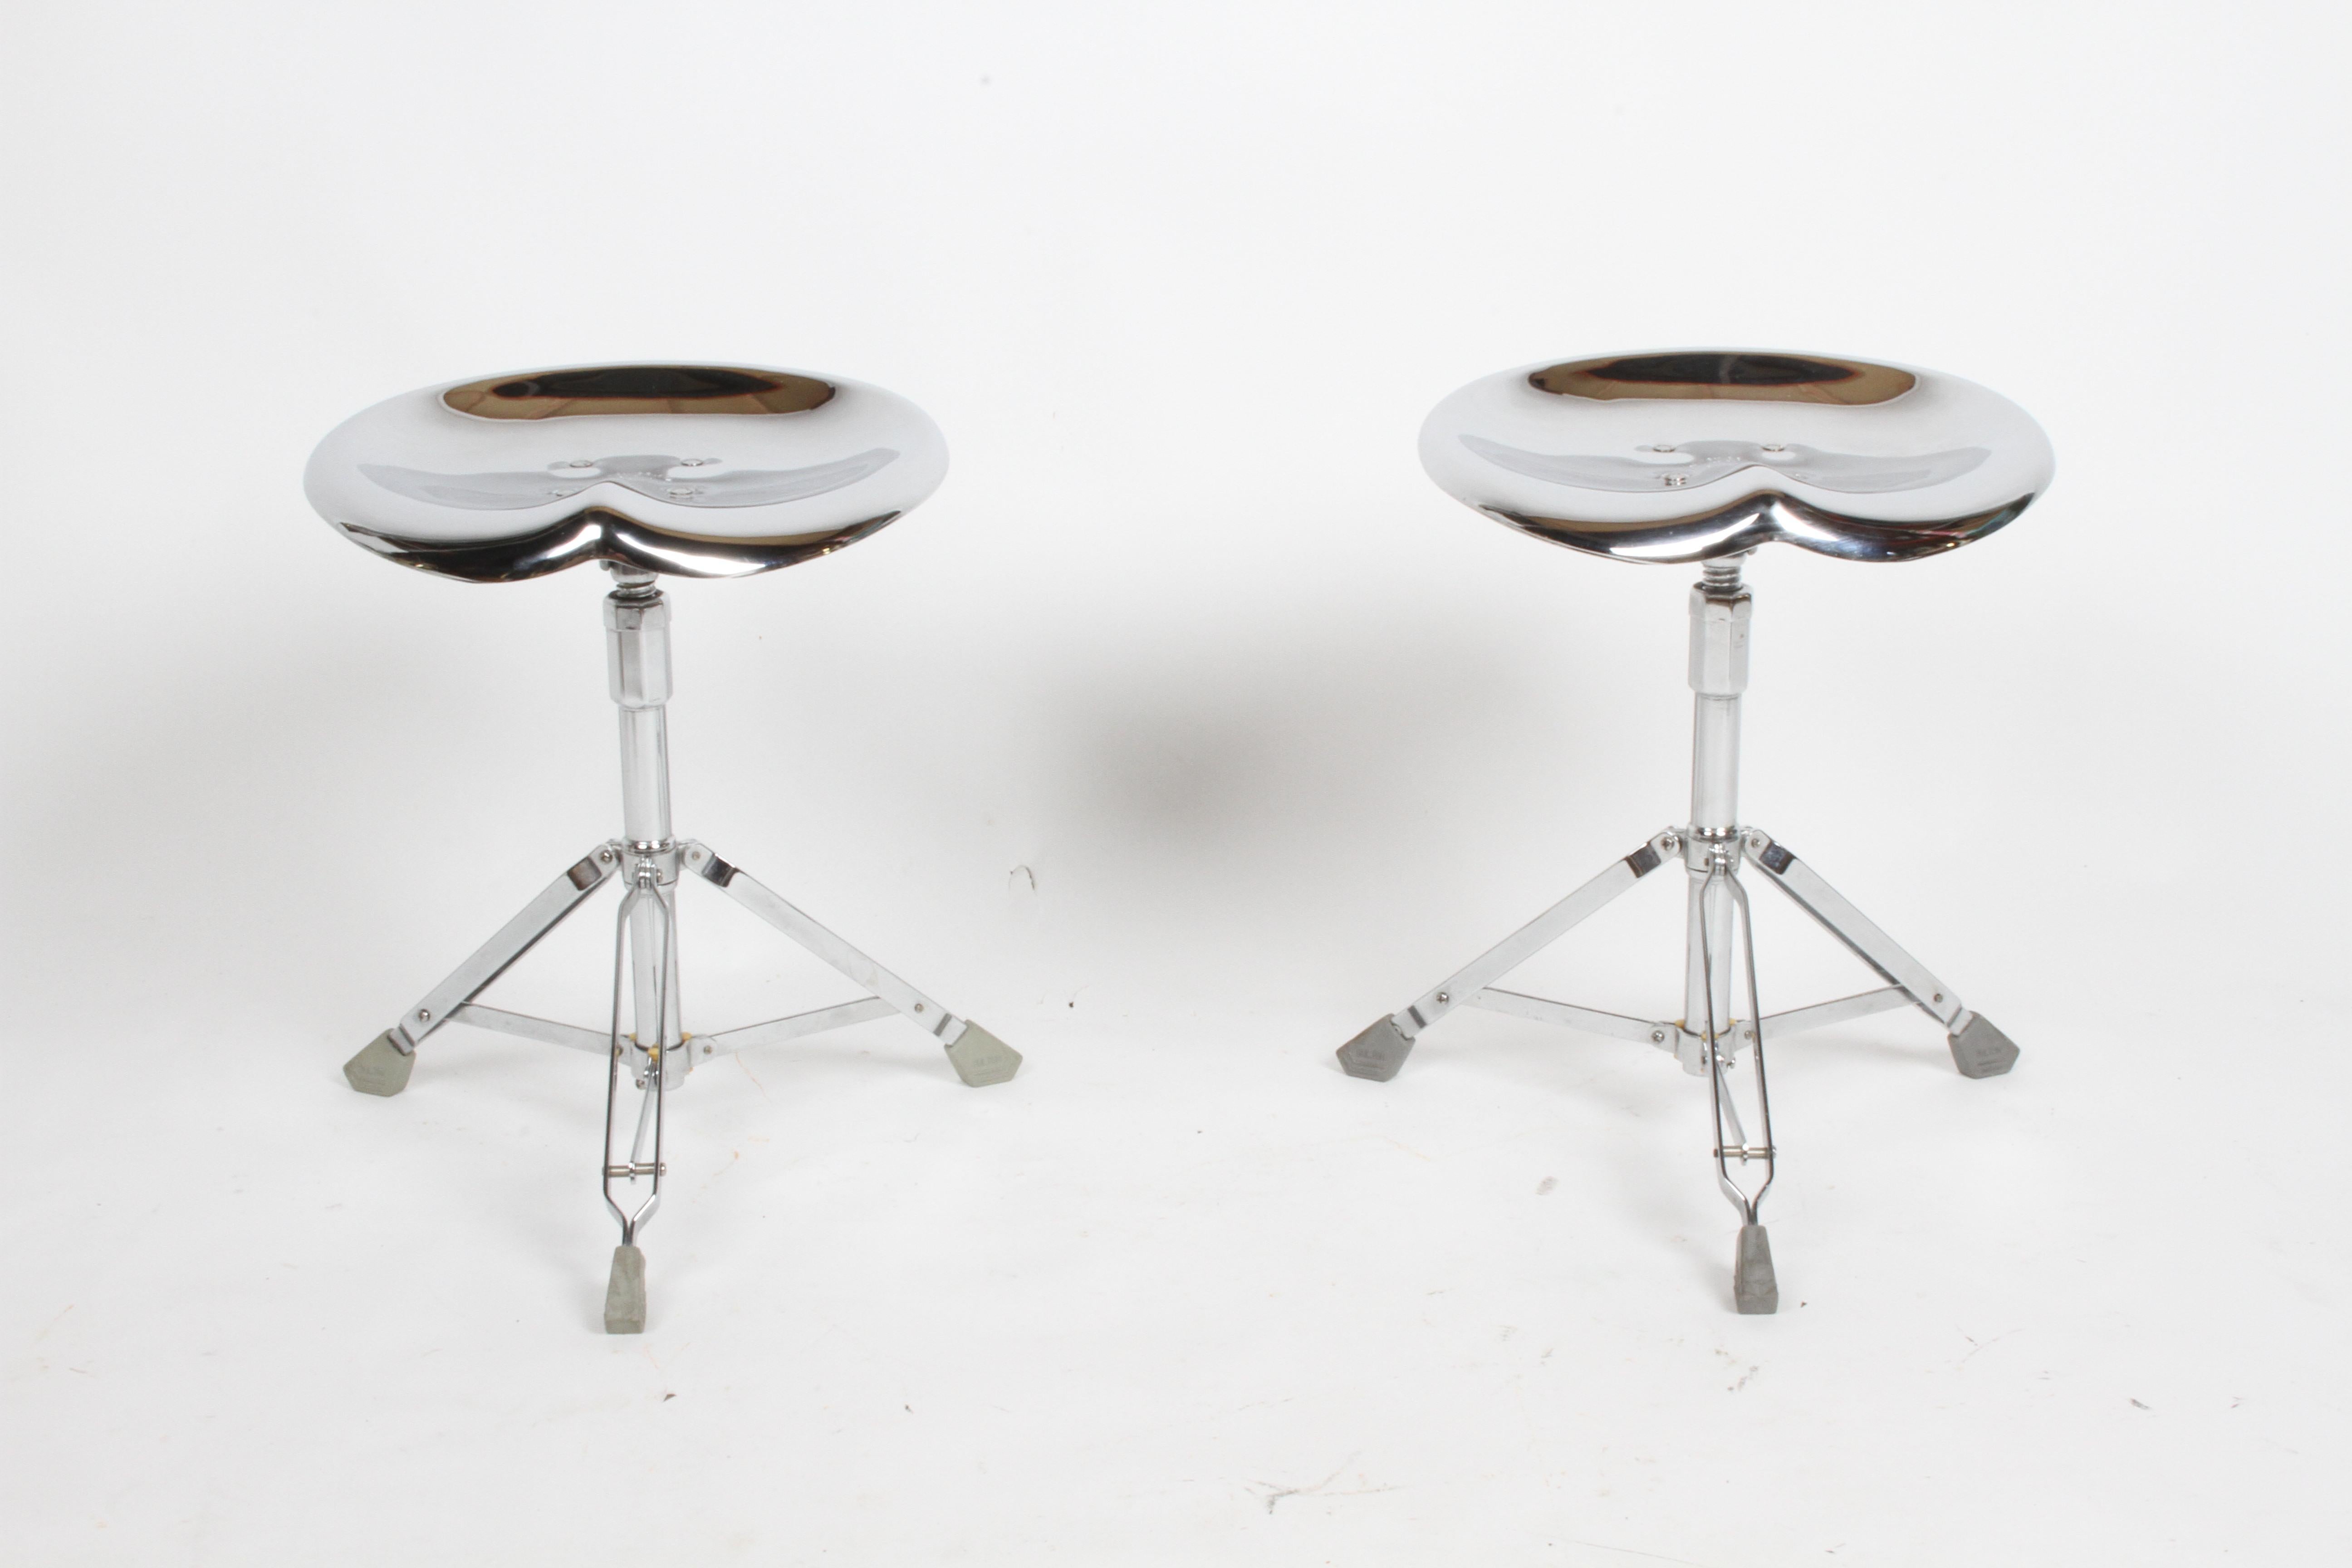 1970s stainless steel molded tractor seat on drum set throne stool base by Japanese designer Yasuaki Sasamoto and produced by Dulton Co. Rare early design. Maker's mark engraved underneath the seat.  Fully adjustable and  collapsible, height adjusts